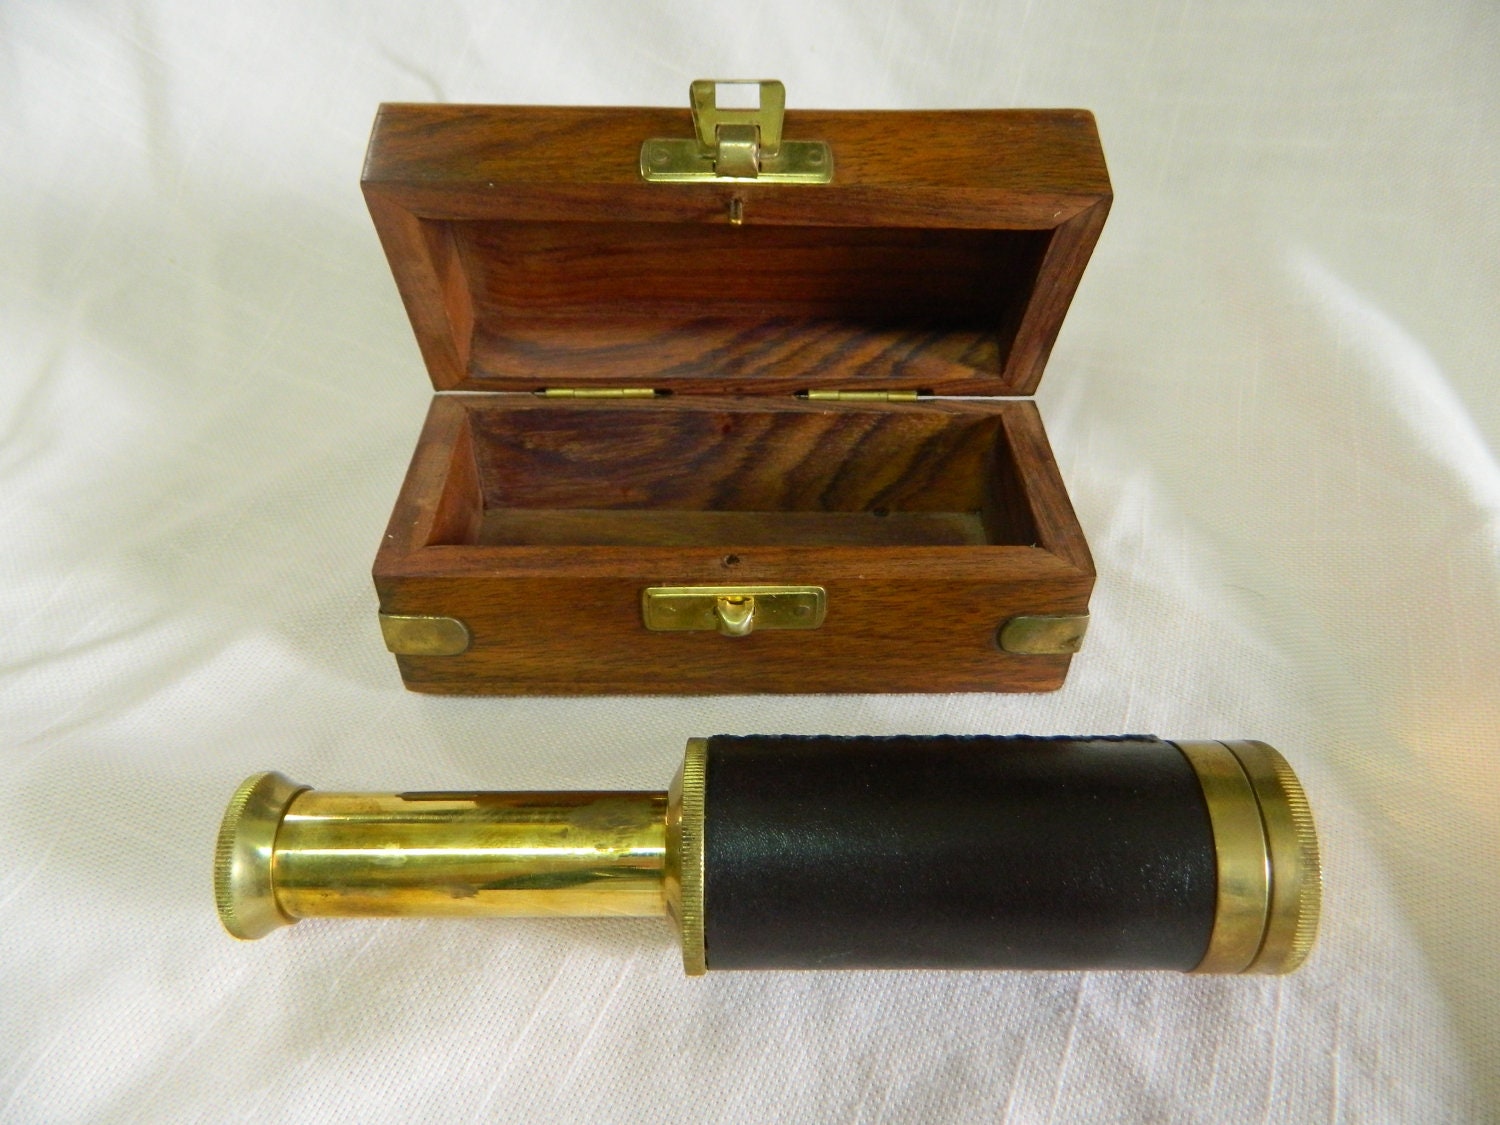 BRASS SPYGLASS TELESCOPE  With Wooden Box Leather Sided Nautical Maritime Vintage Pirate Halloween Prop